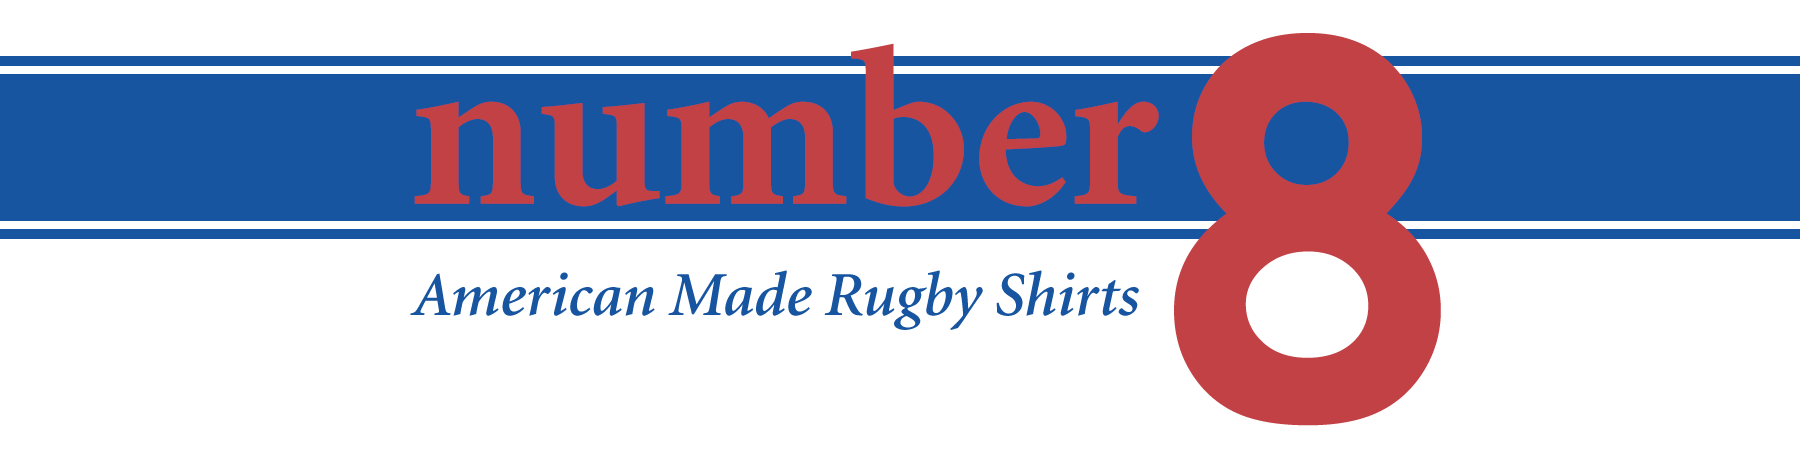 number 8 rugby shirts